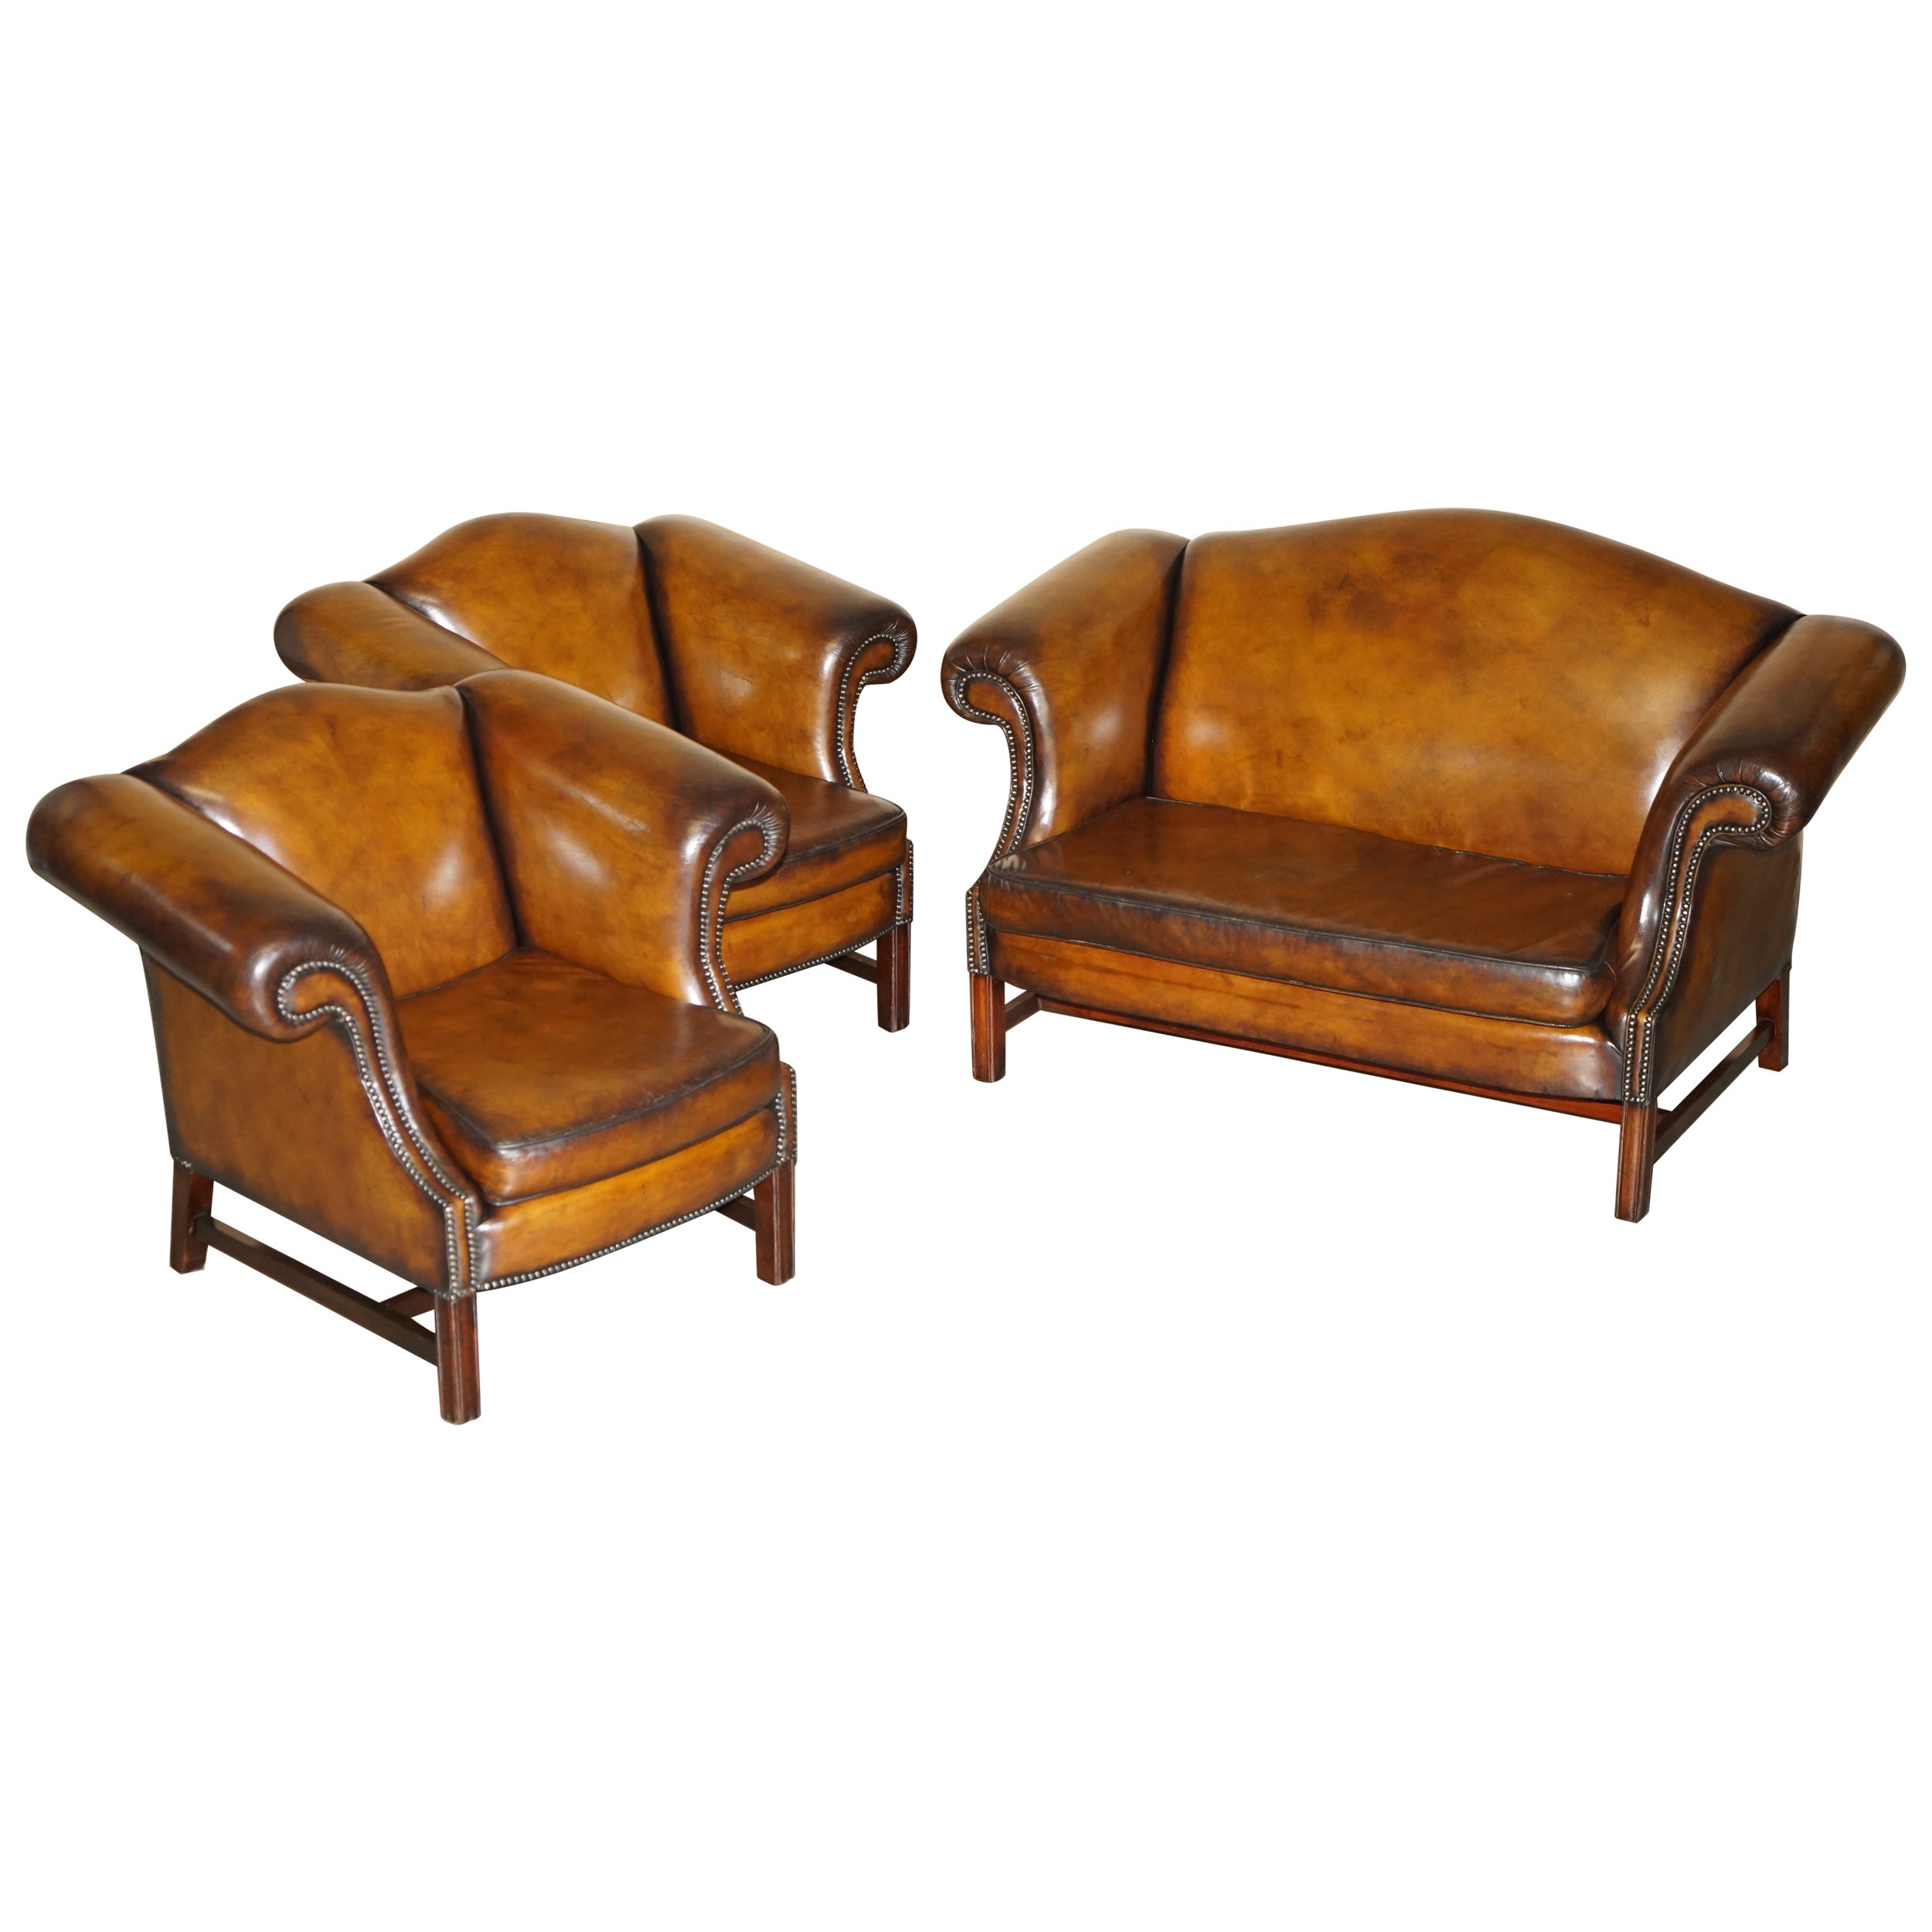 FINE ANTiQUE REGENCY HUMPBACK STYLE RESTORED BROWN LEATHER SOFA ARMCHAIR SUITE